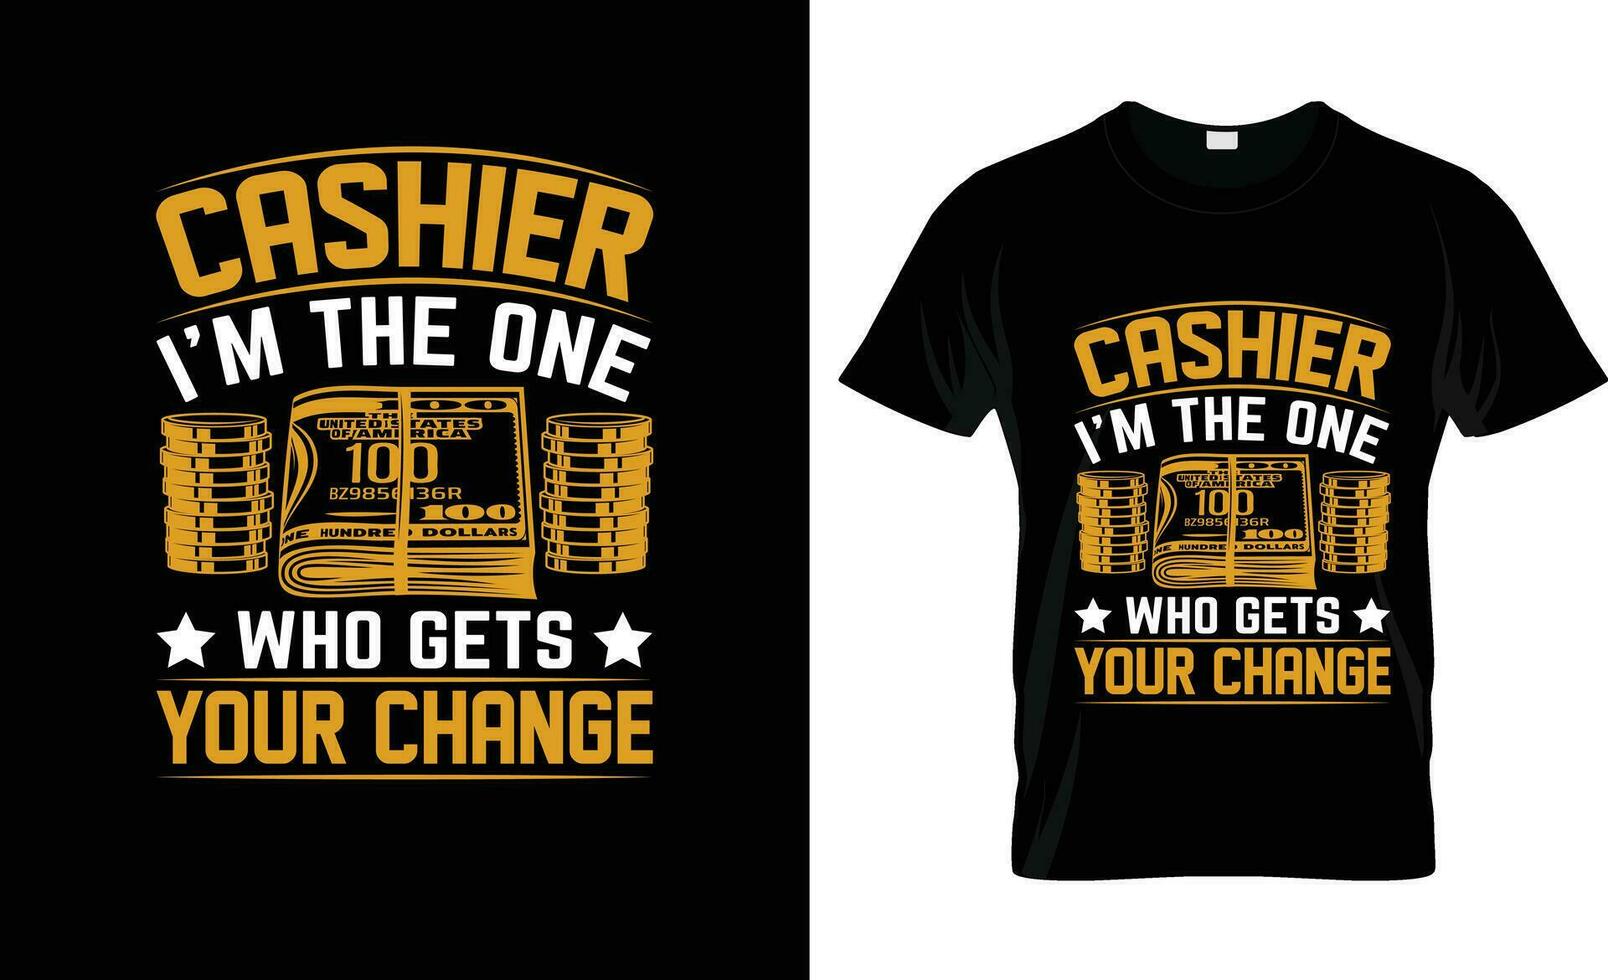 cashier im the one who gets your change colorful Graphic T-Shirt ,t-shirt print mockup vector